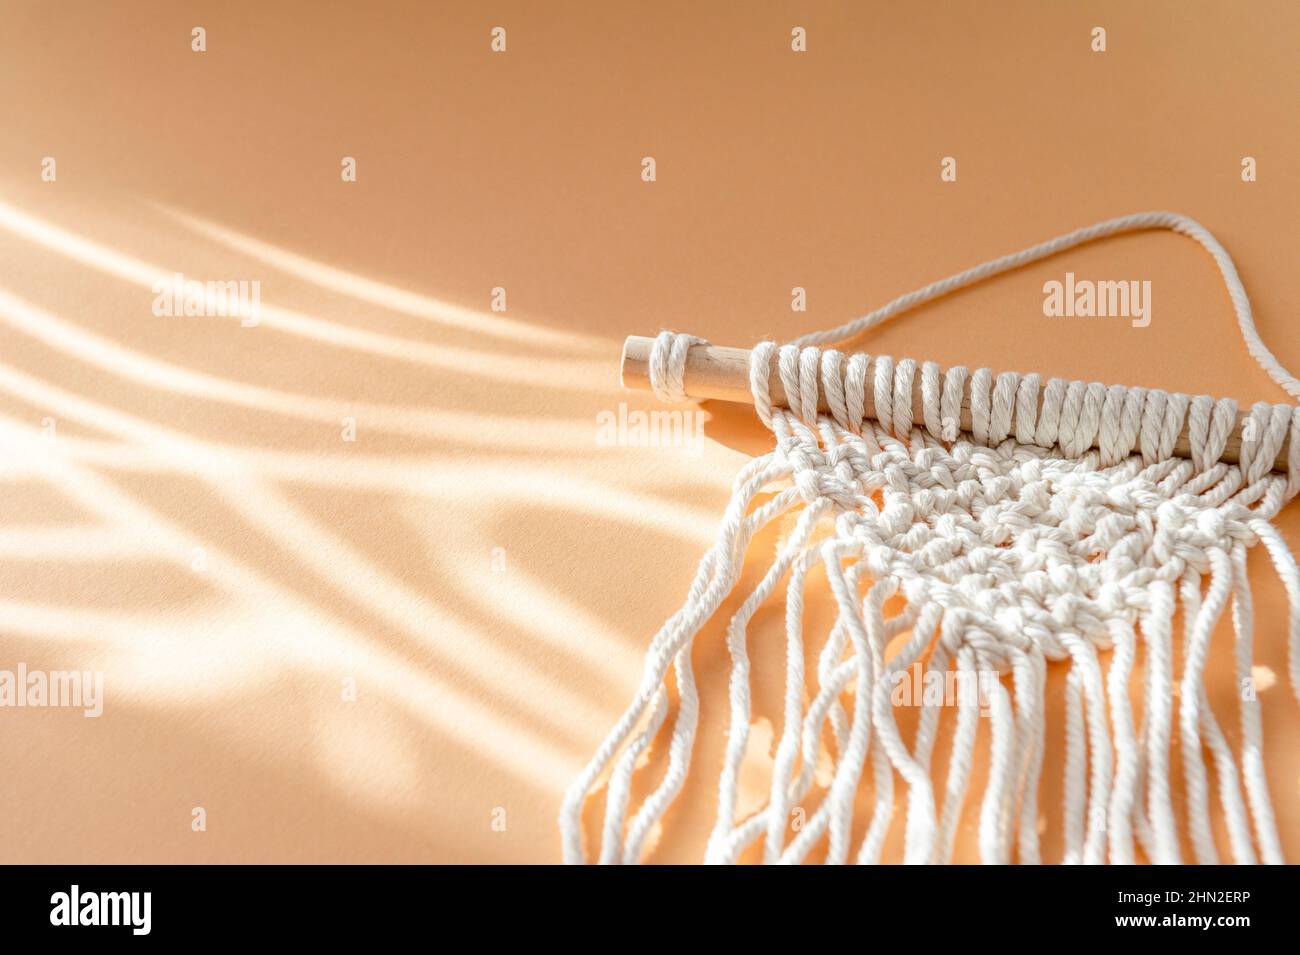 Macrame accessories on beige background. Creative hobby concept. Top view Stock Photo